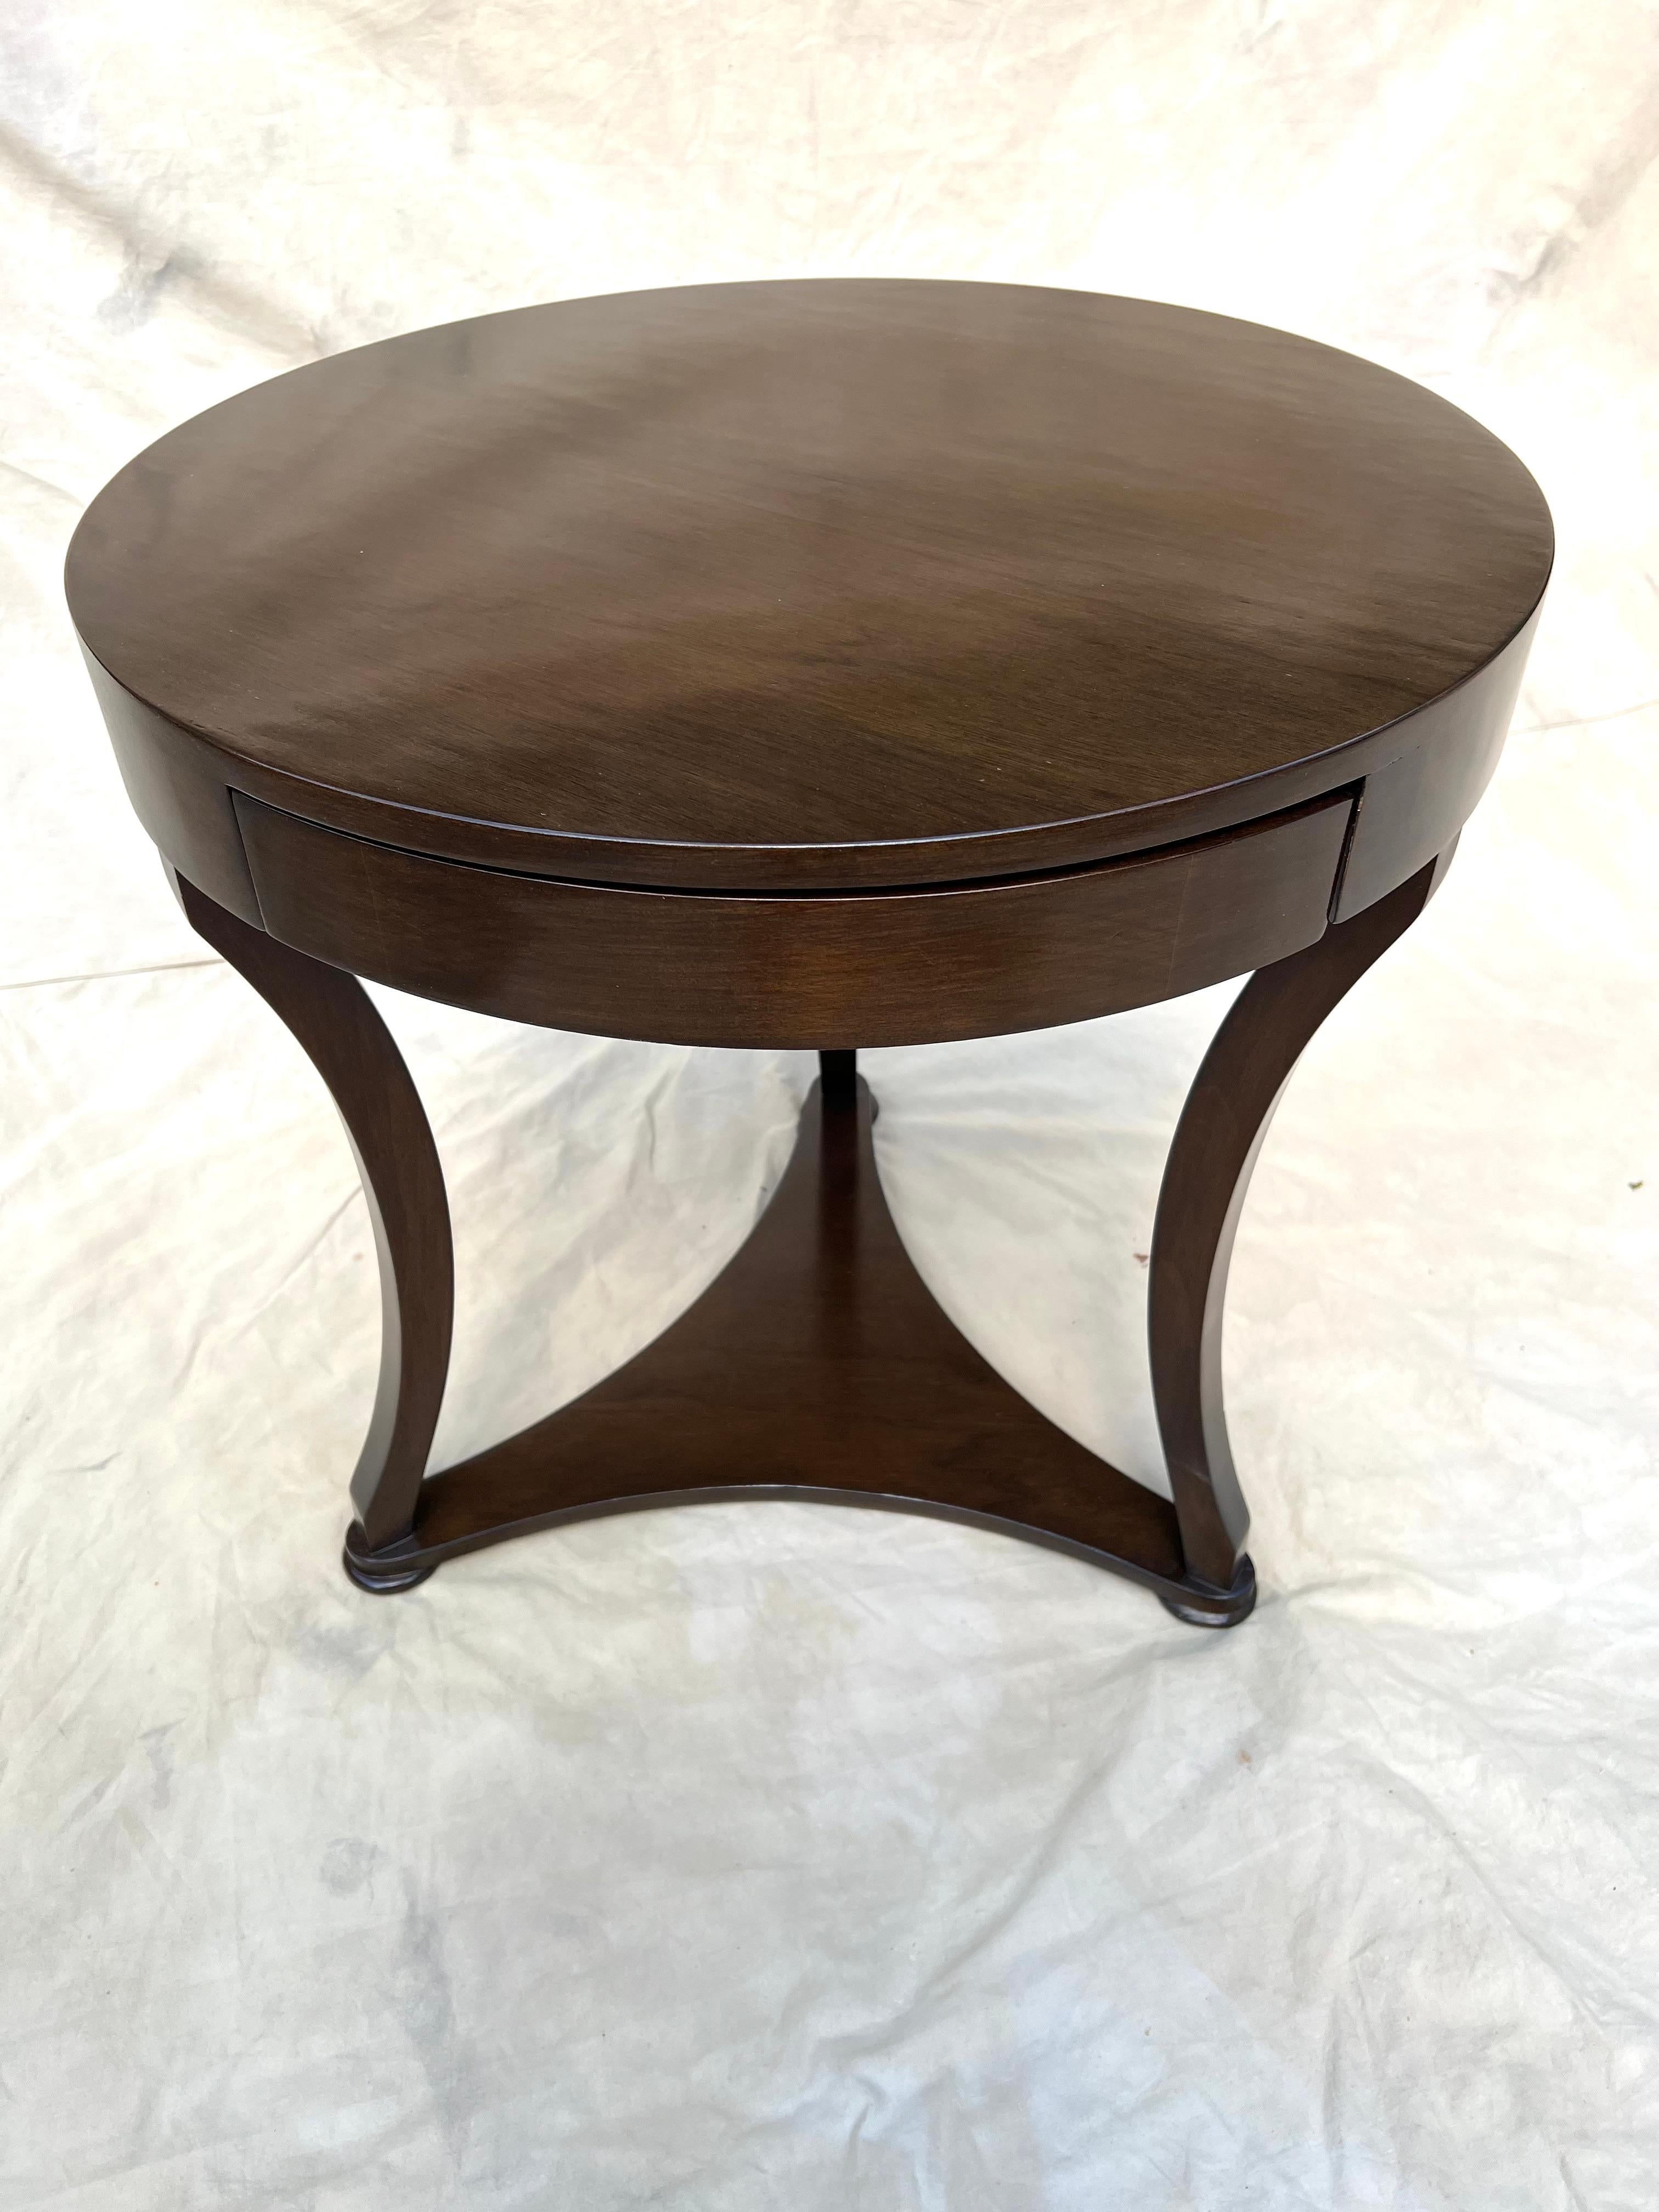 Polished Walnut Finish Round Side Table in Walnut Finish with Drawer